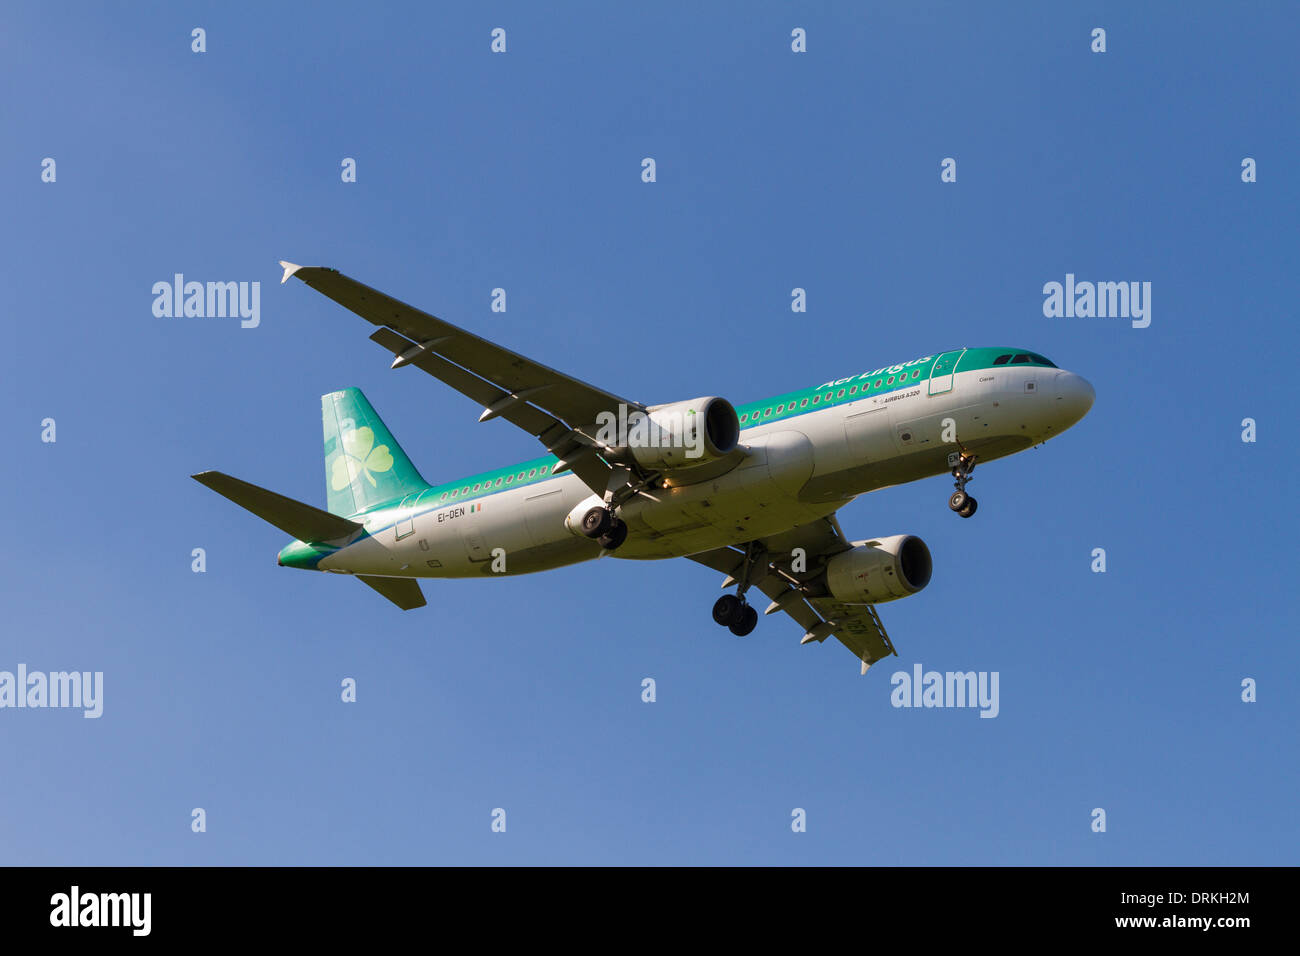 Air Lingus, Airbus A320 to land Stock Photo